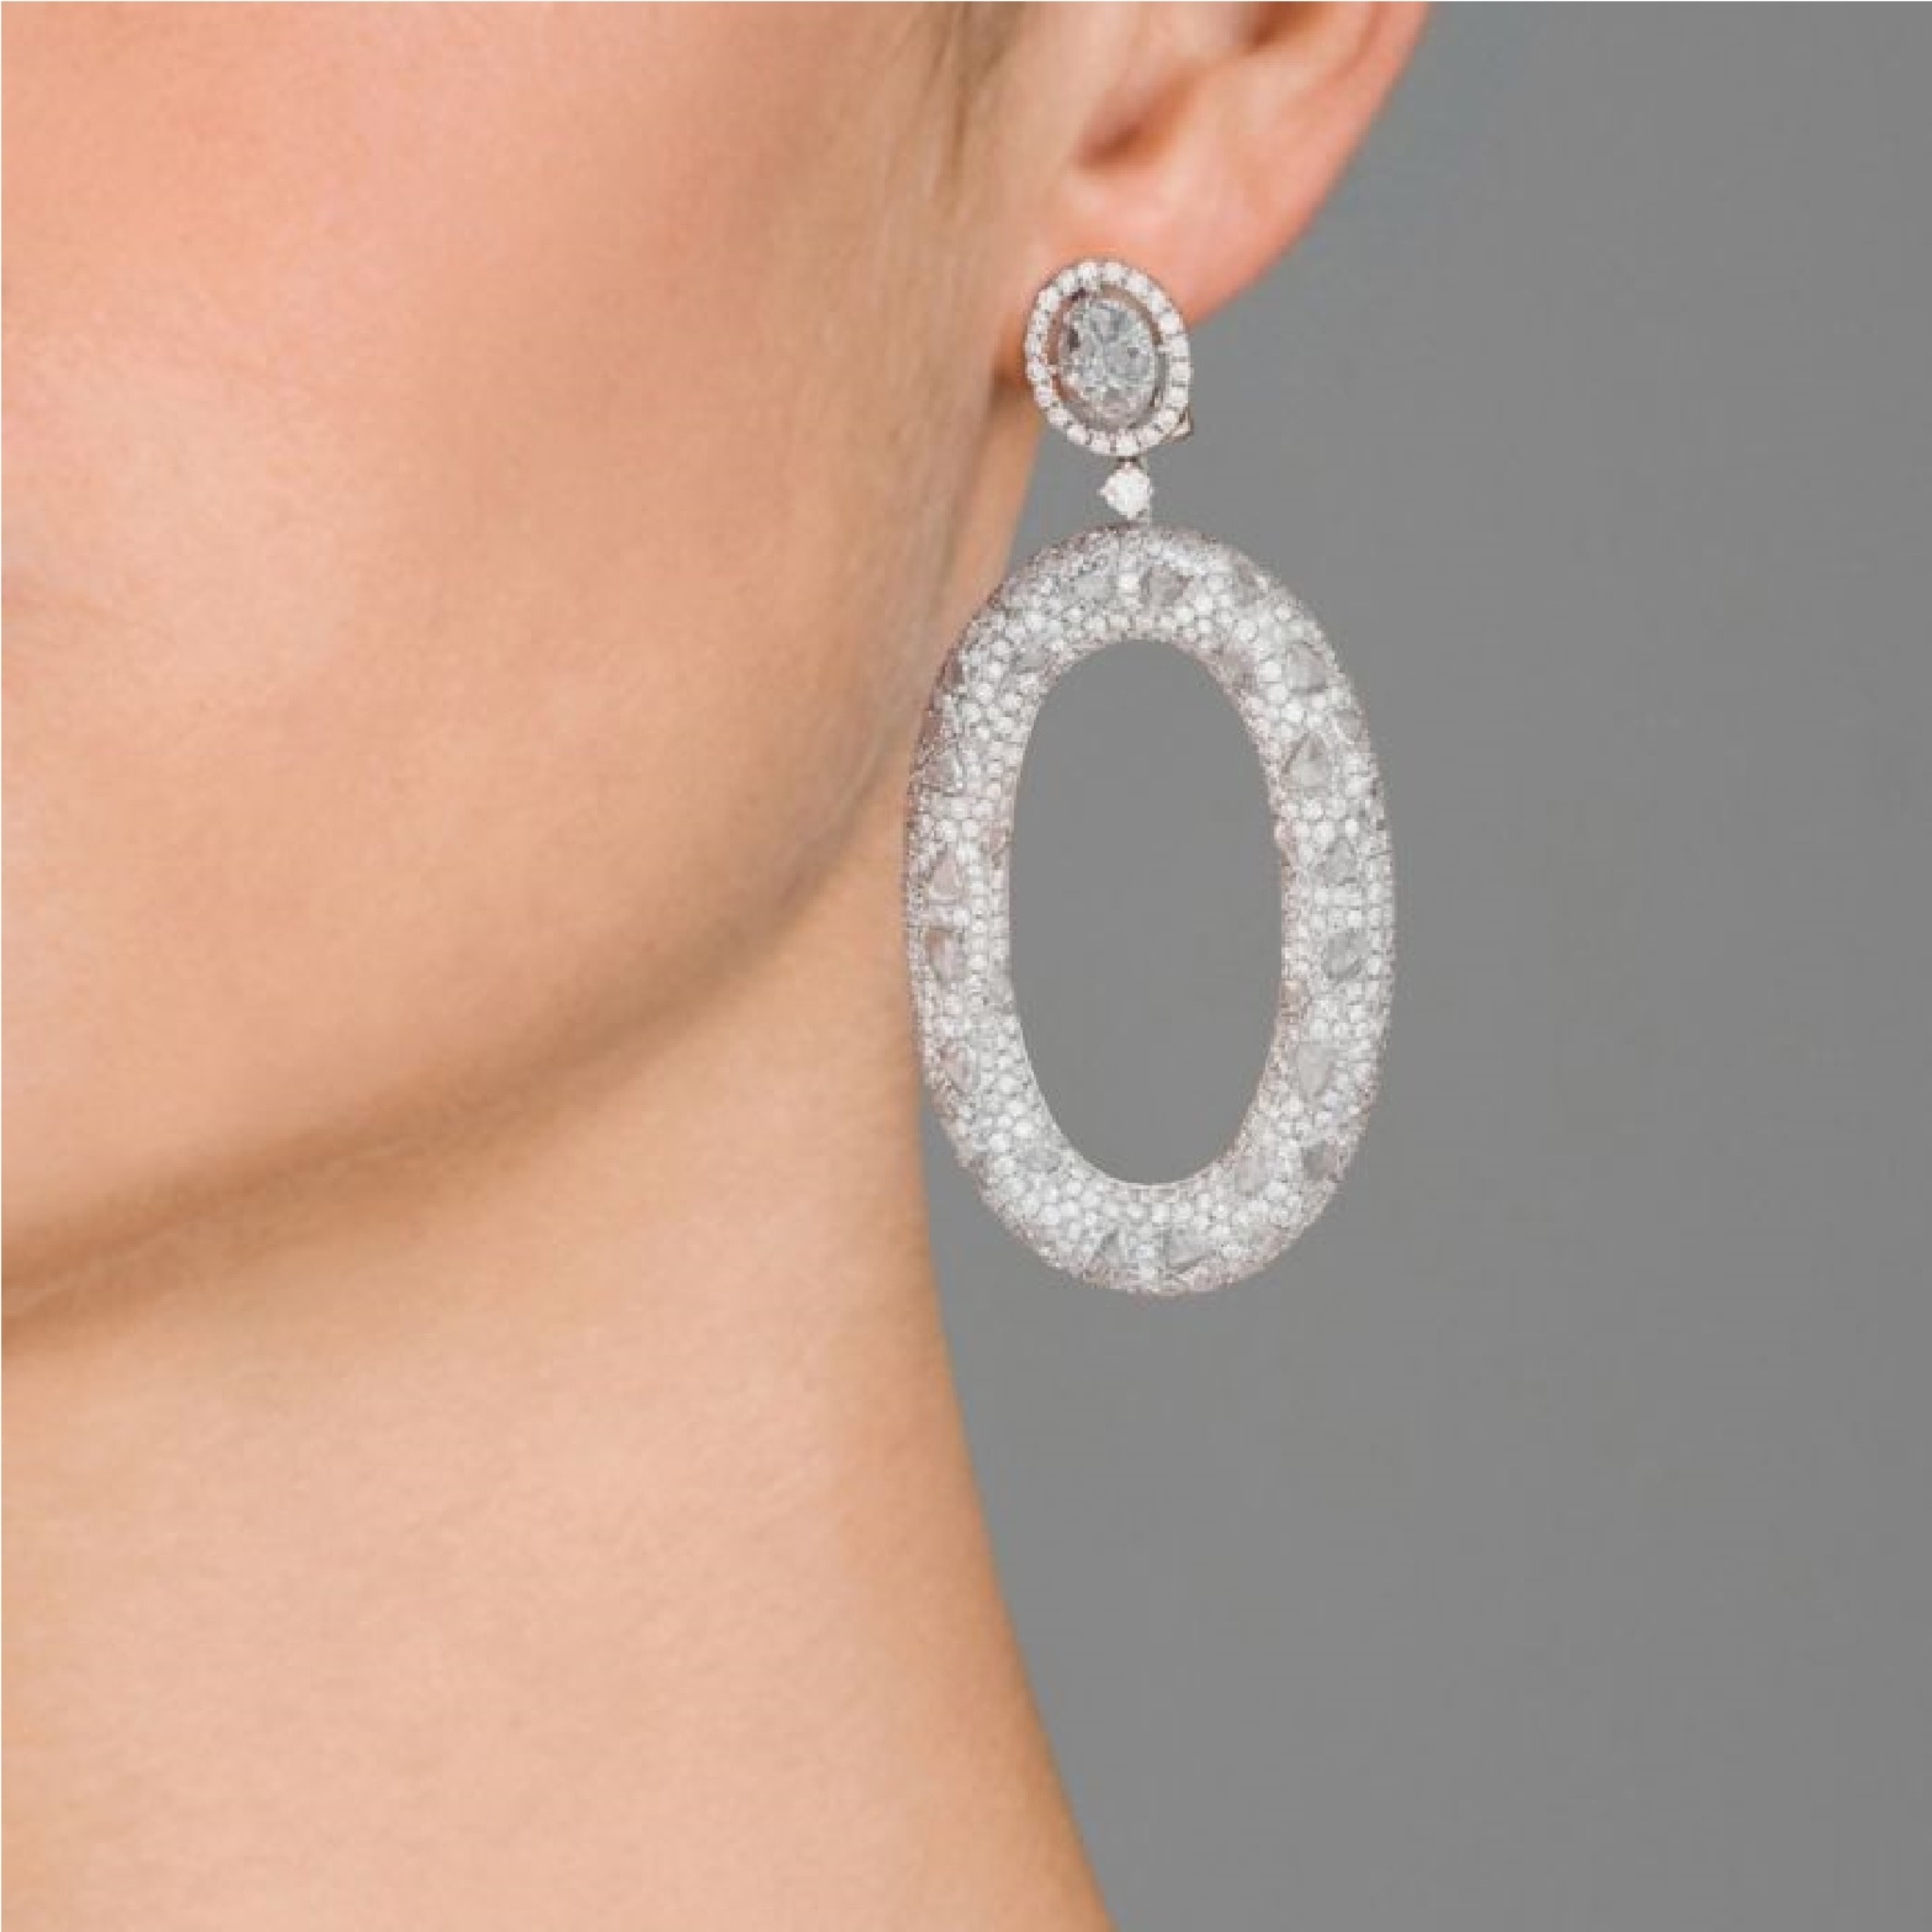 18 kt white gold diamond fashion earrings adorned with 13.48 cts tw of diamonds of various size and shape.jpg